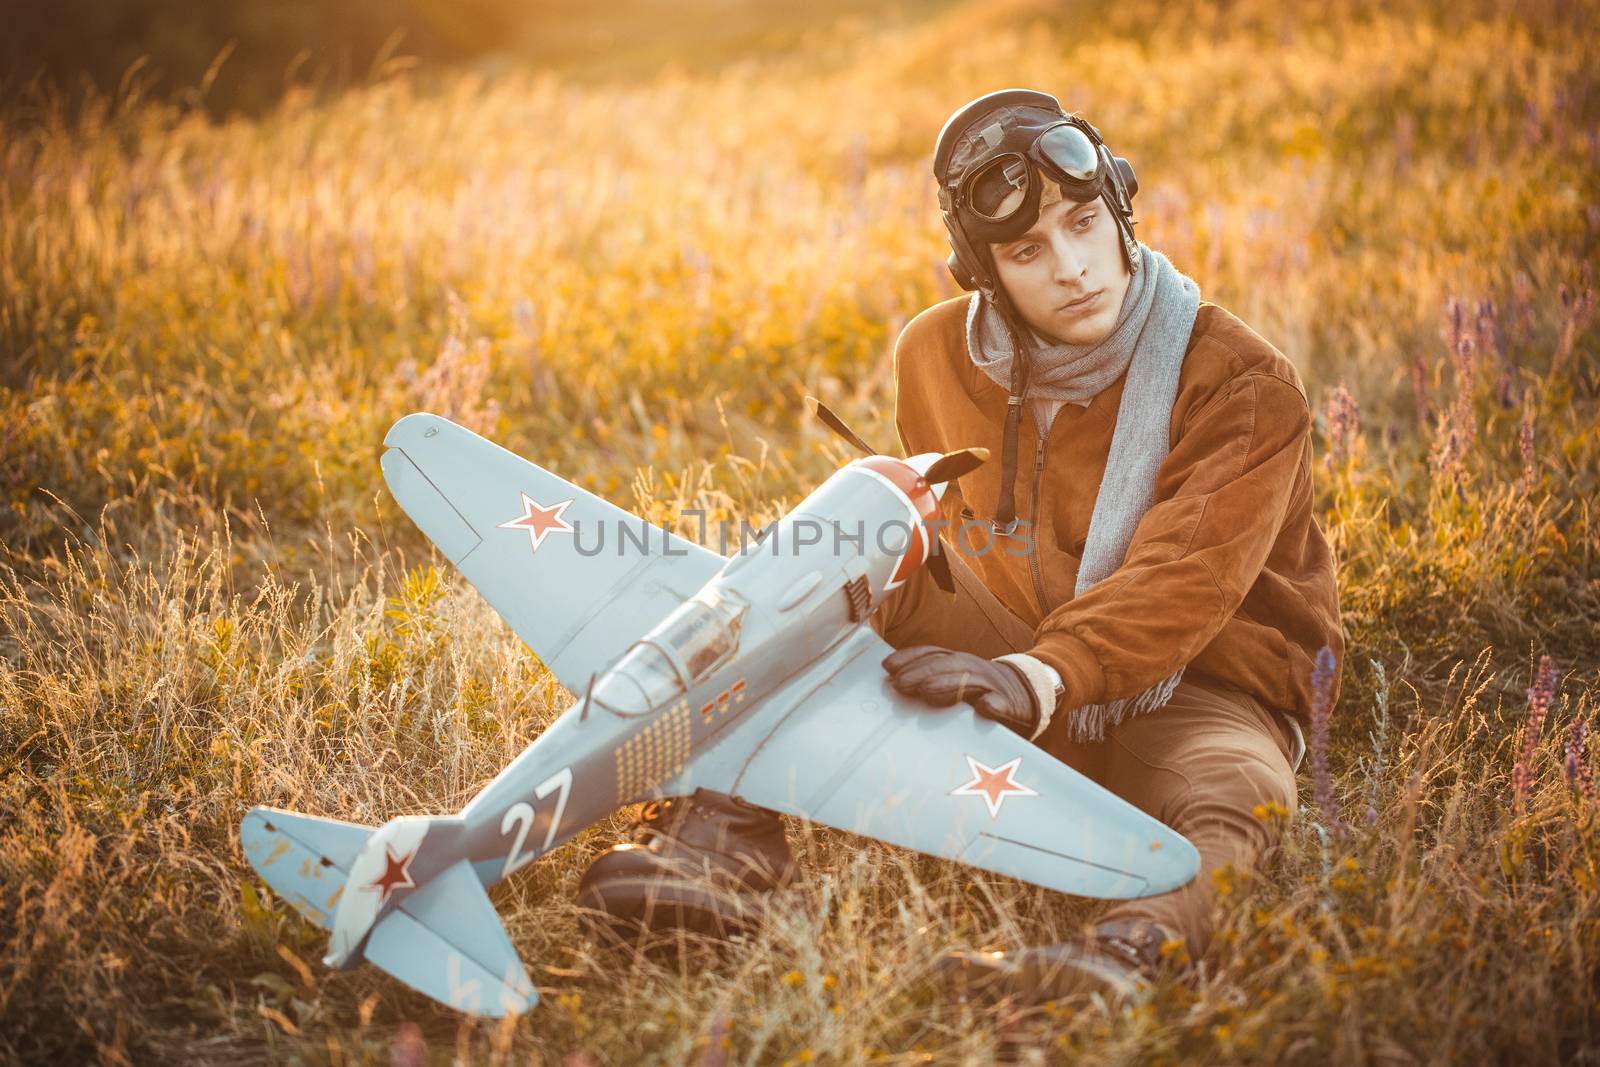 Guy in vintage clothes pilot with an airplane model outdoors by vlad_star